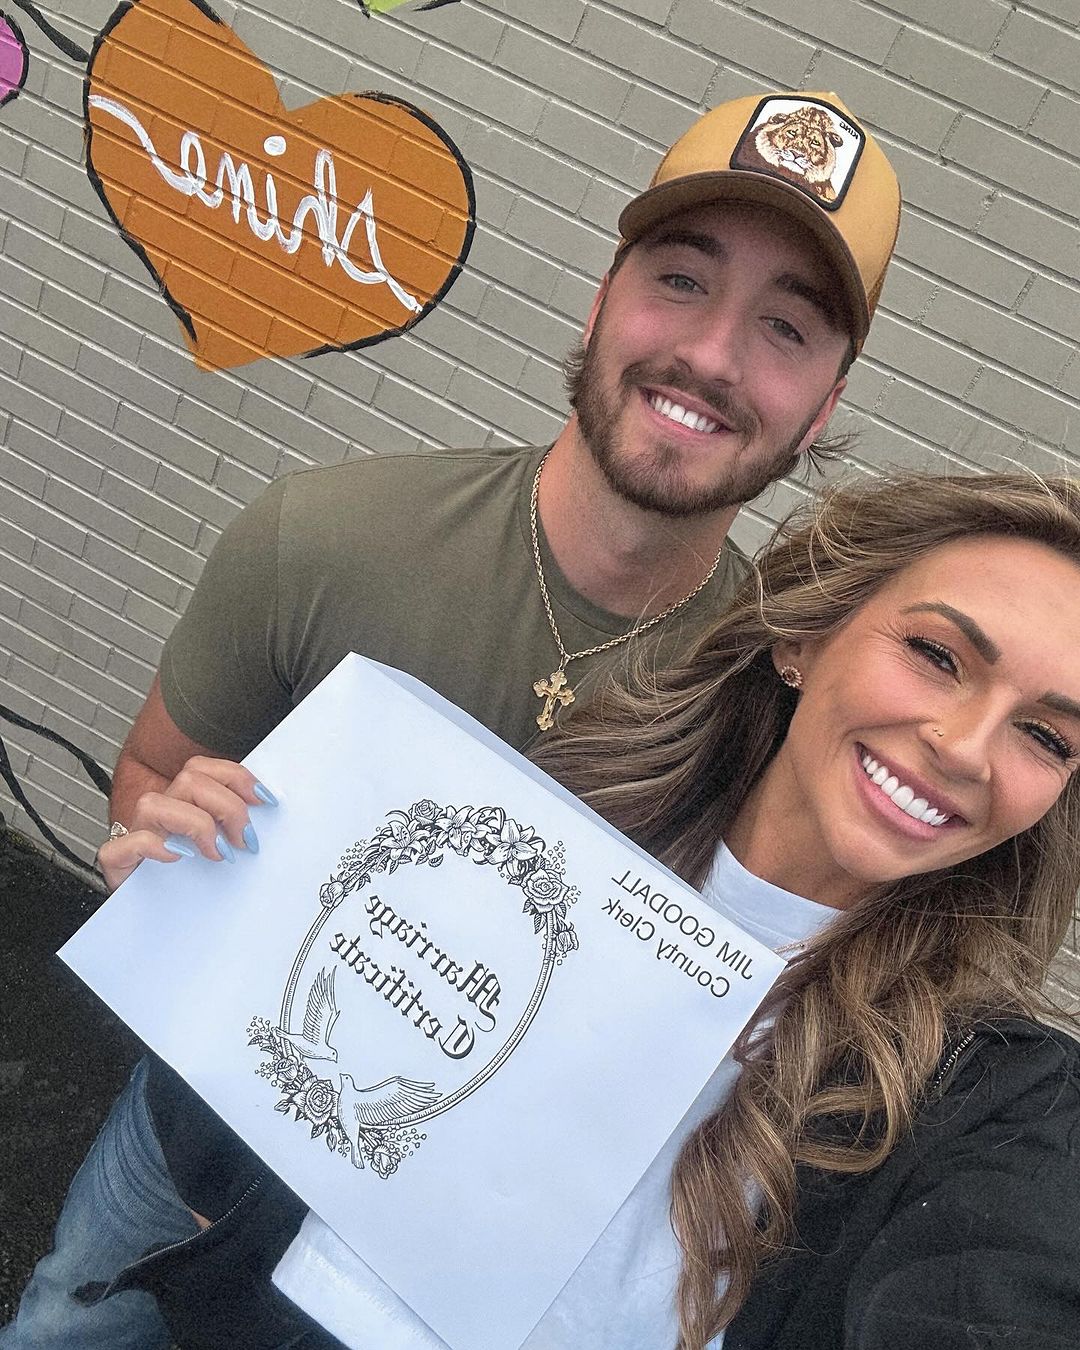 KT and Luke posed a photo of an envelope holding their marriage certificate on April 3, the day the couple got married